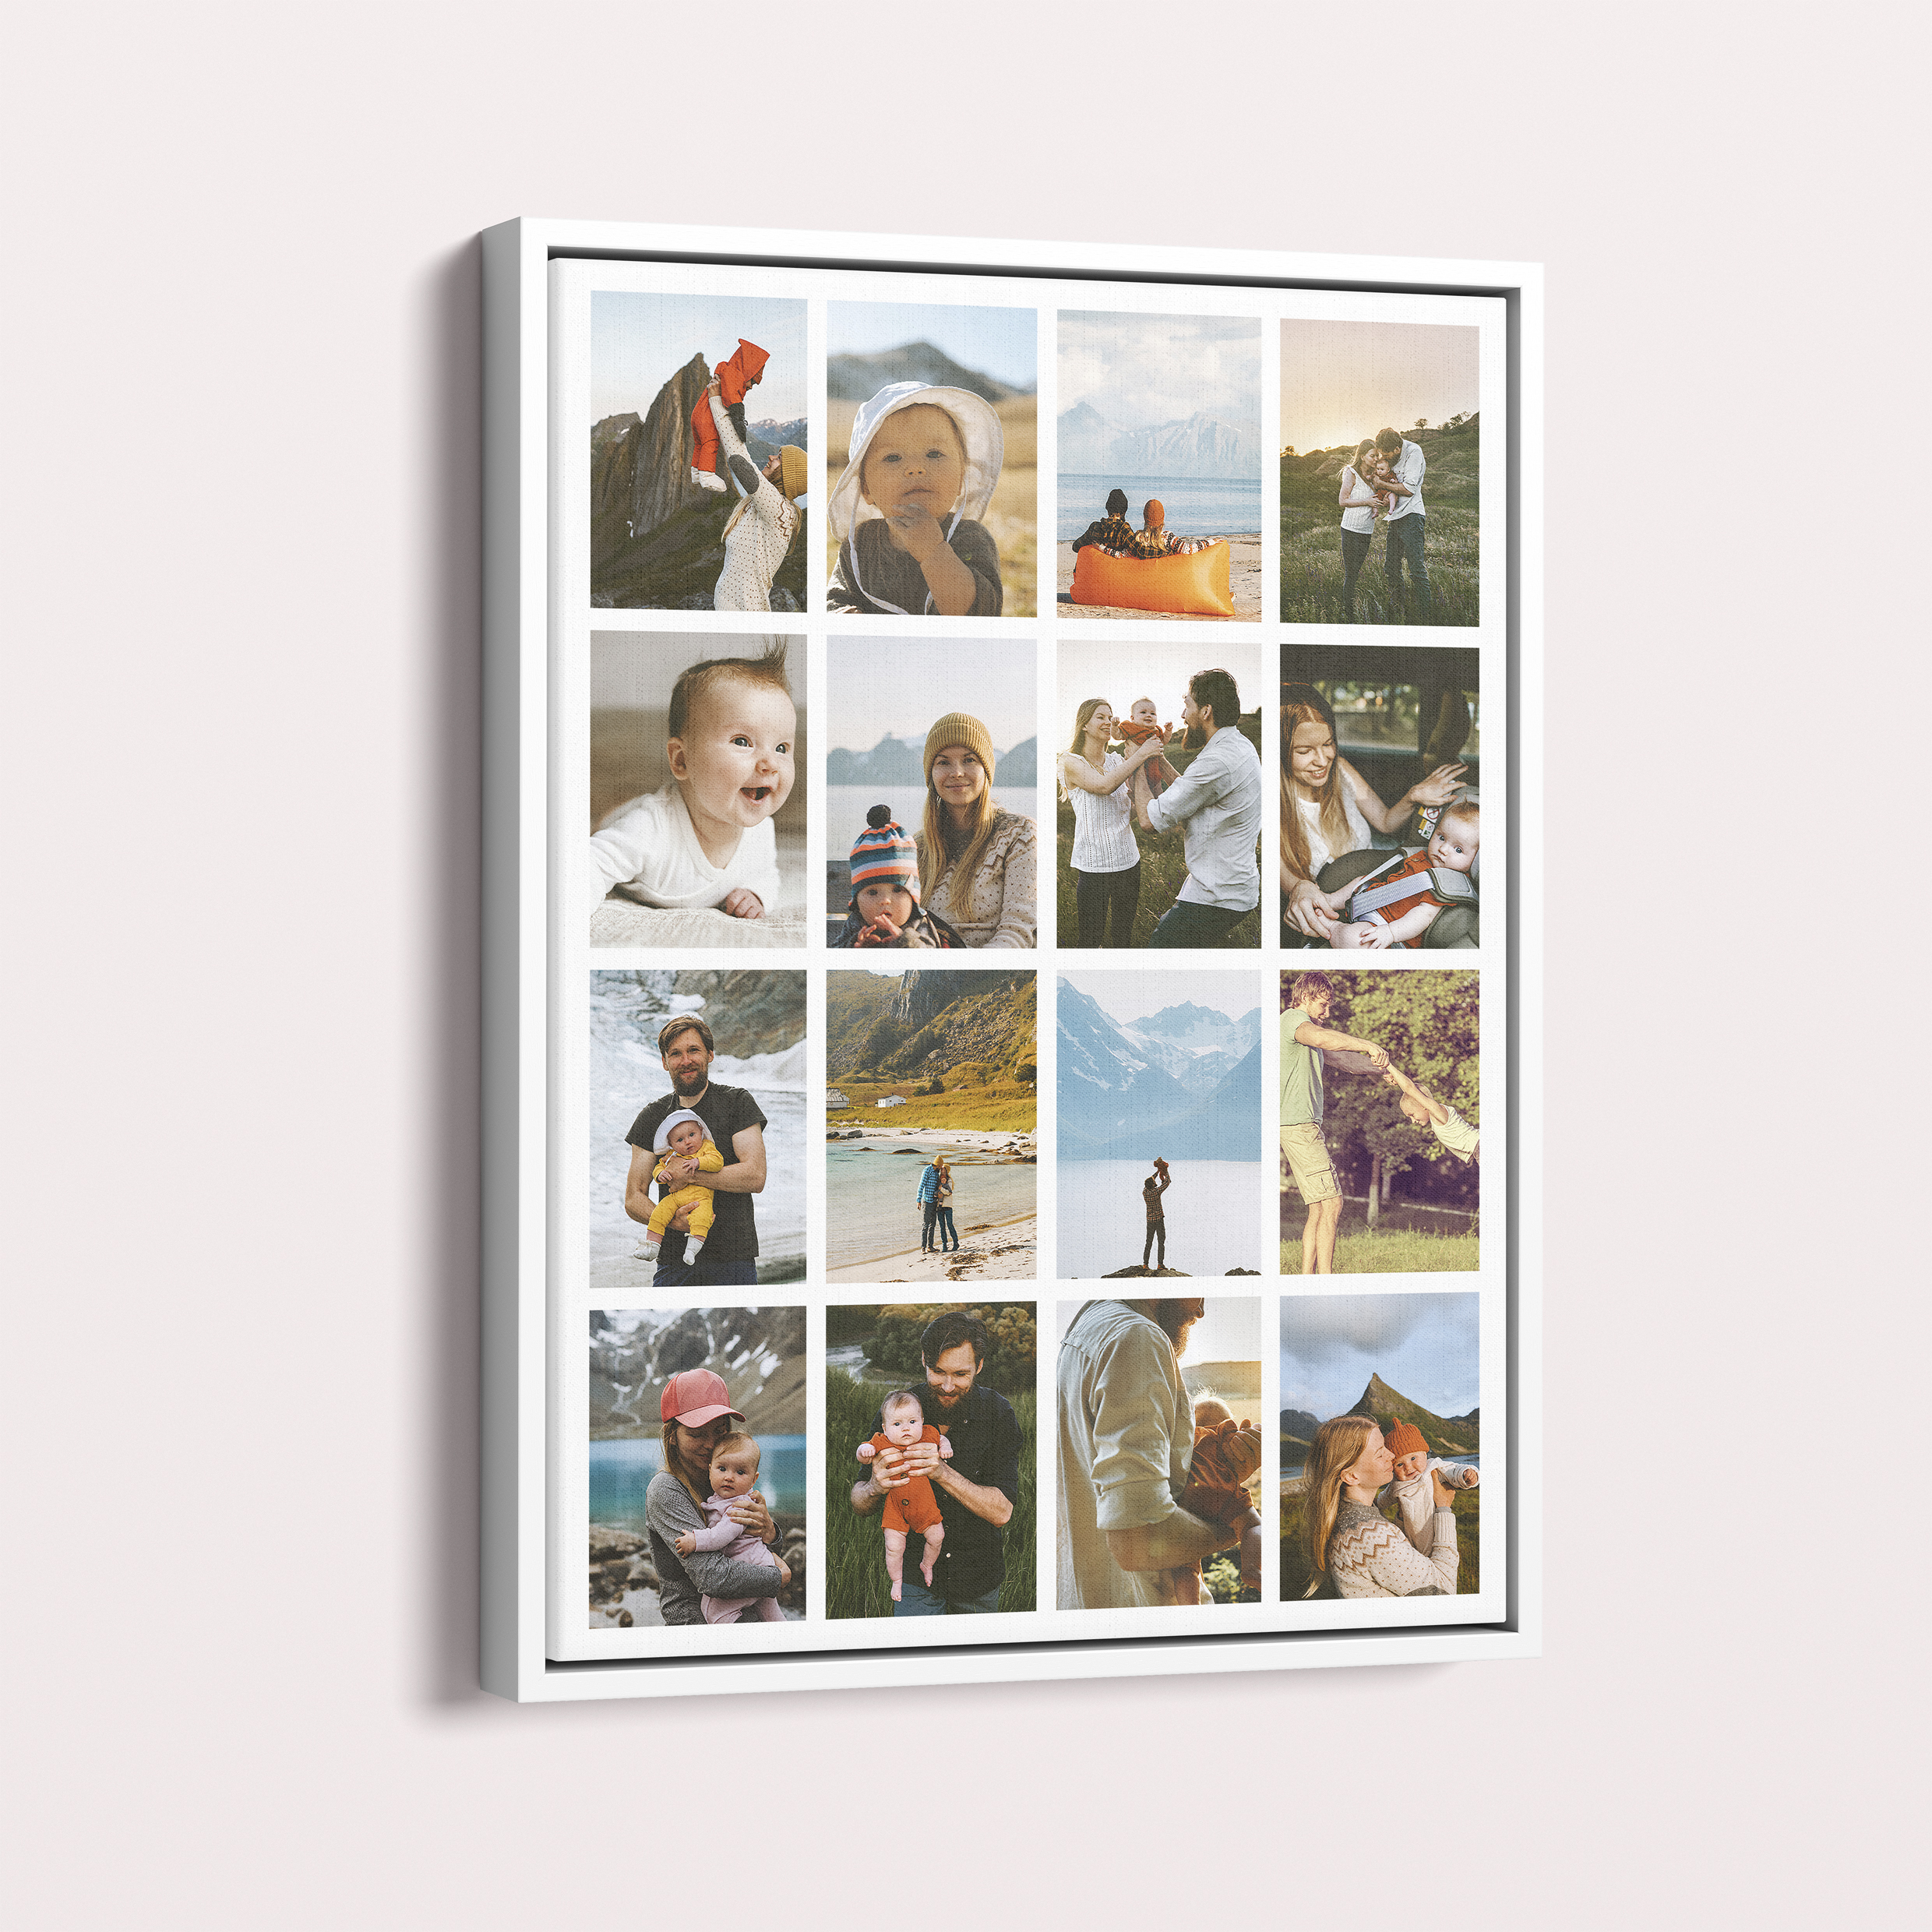  Personalized Spectrum of Moments Framed Photo Canvases - A Stunning Keepsake for 10+ Cherished Photos